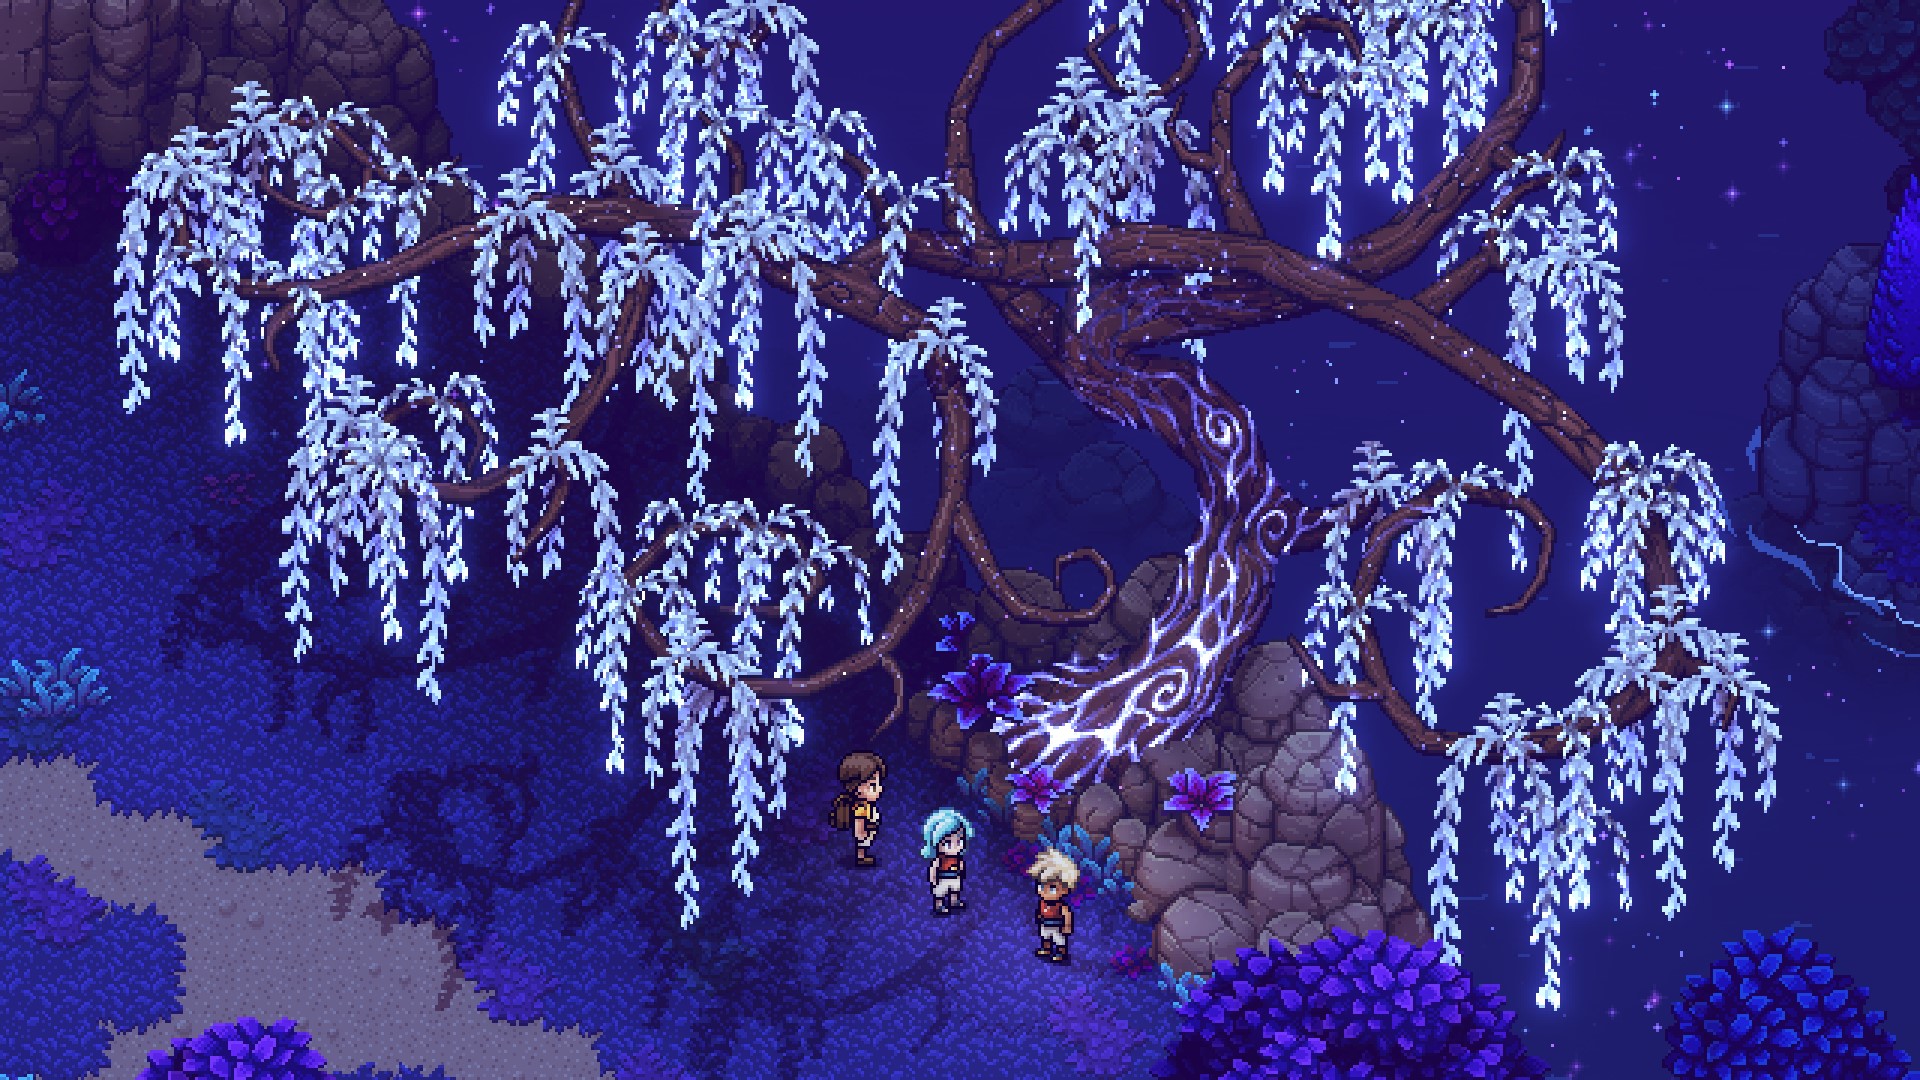 Sea of Stars review - a throwback RPG laced with modern magic and